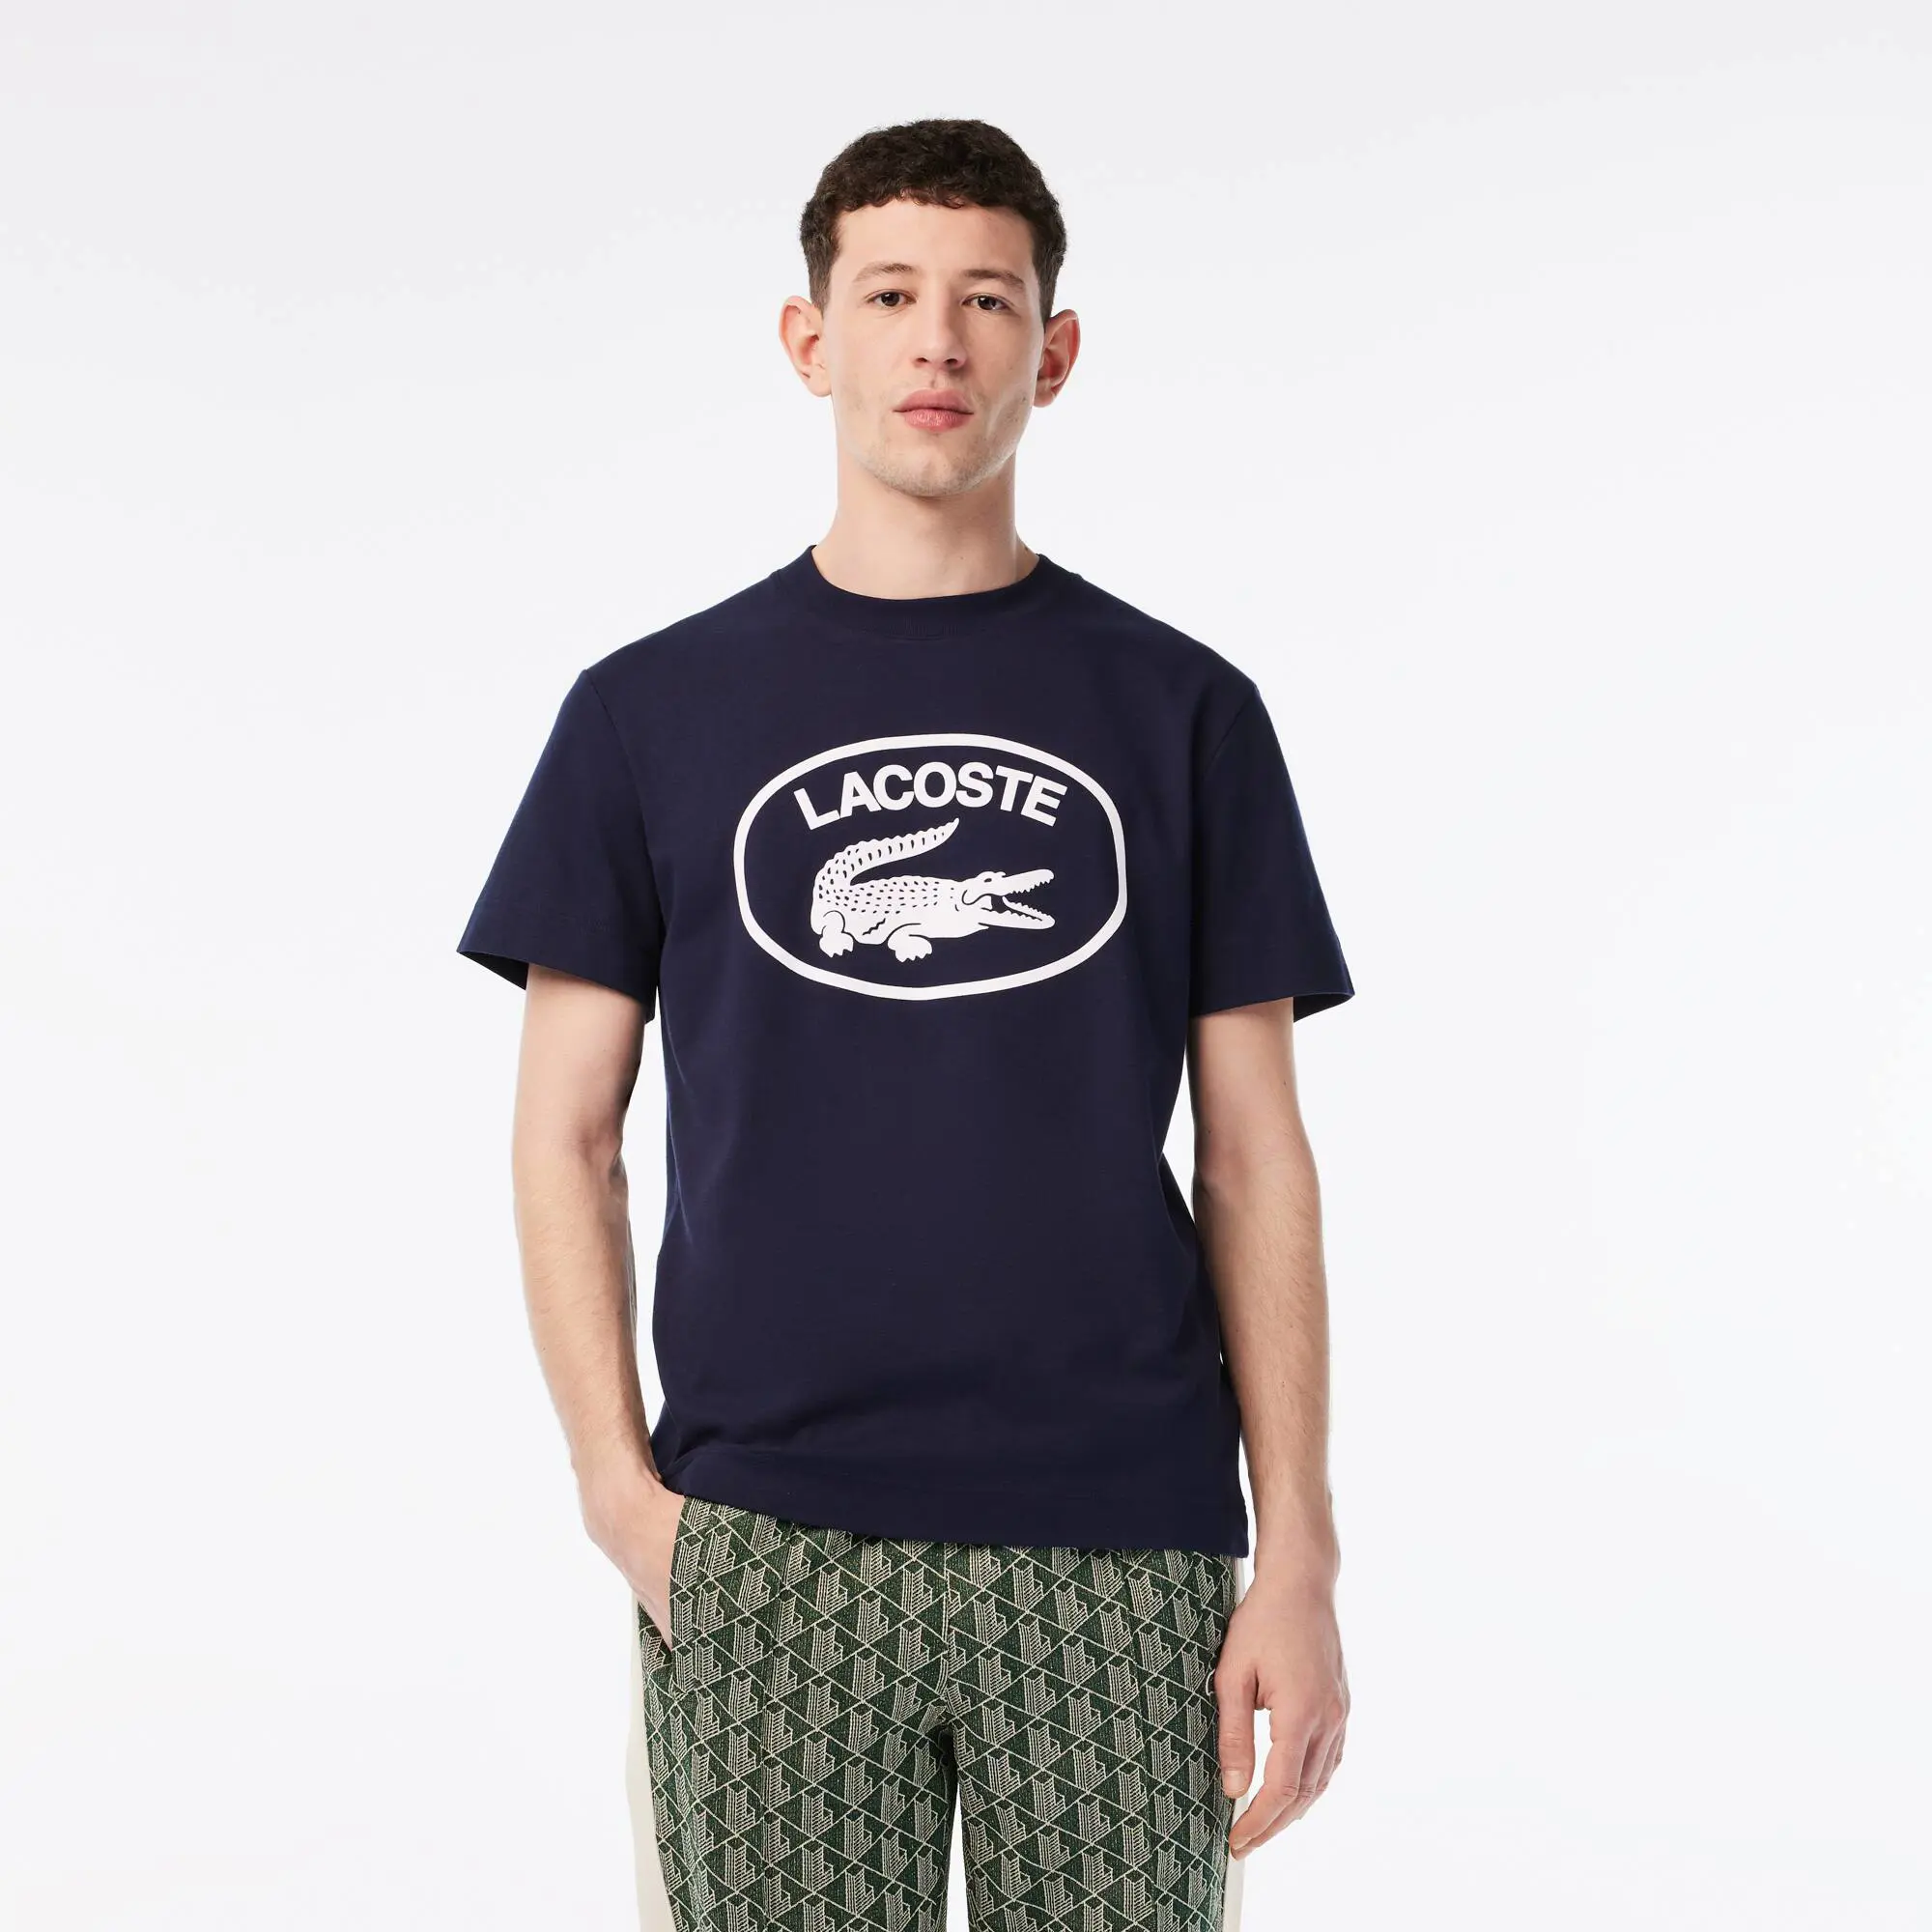 Lacoste Men's Lacoste Relaxed Fit Branded Cotton T-Shirt. 1